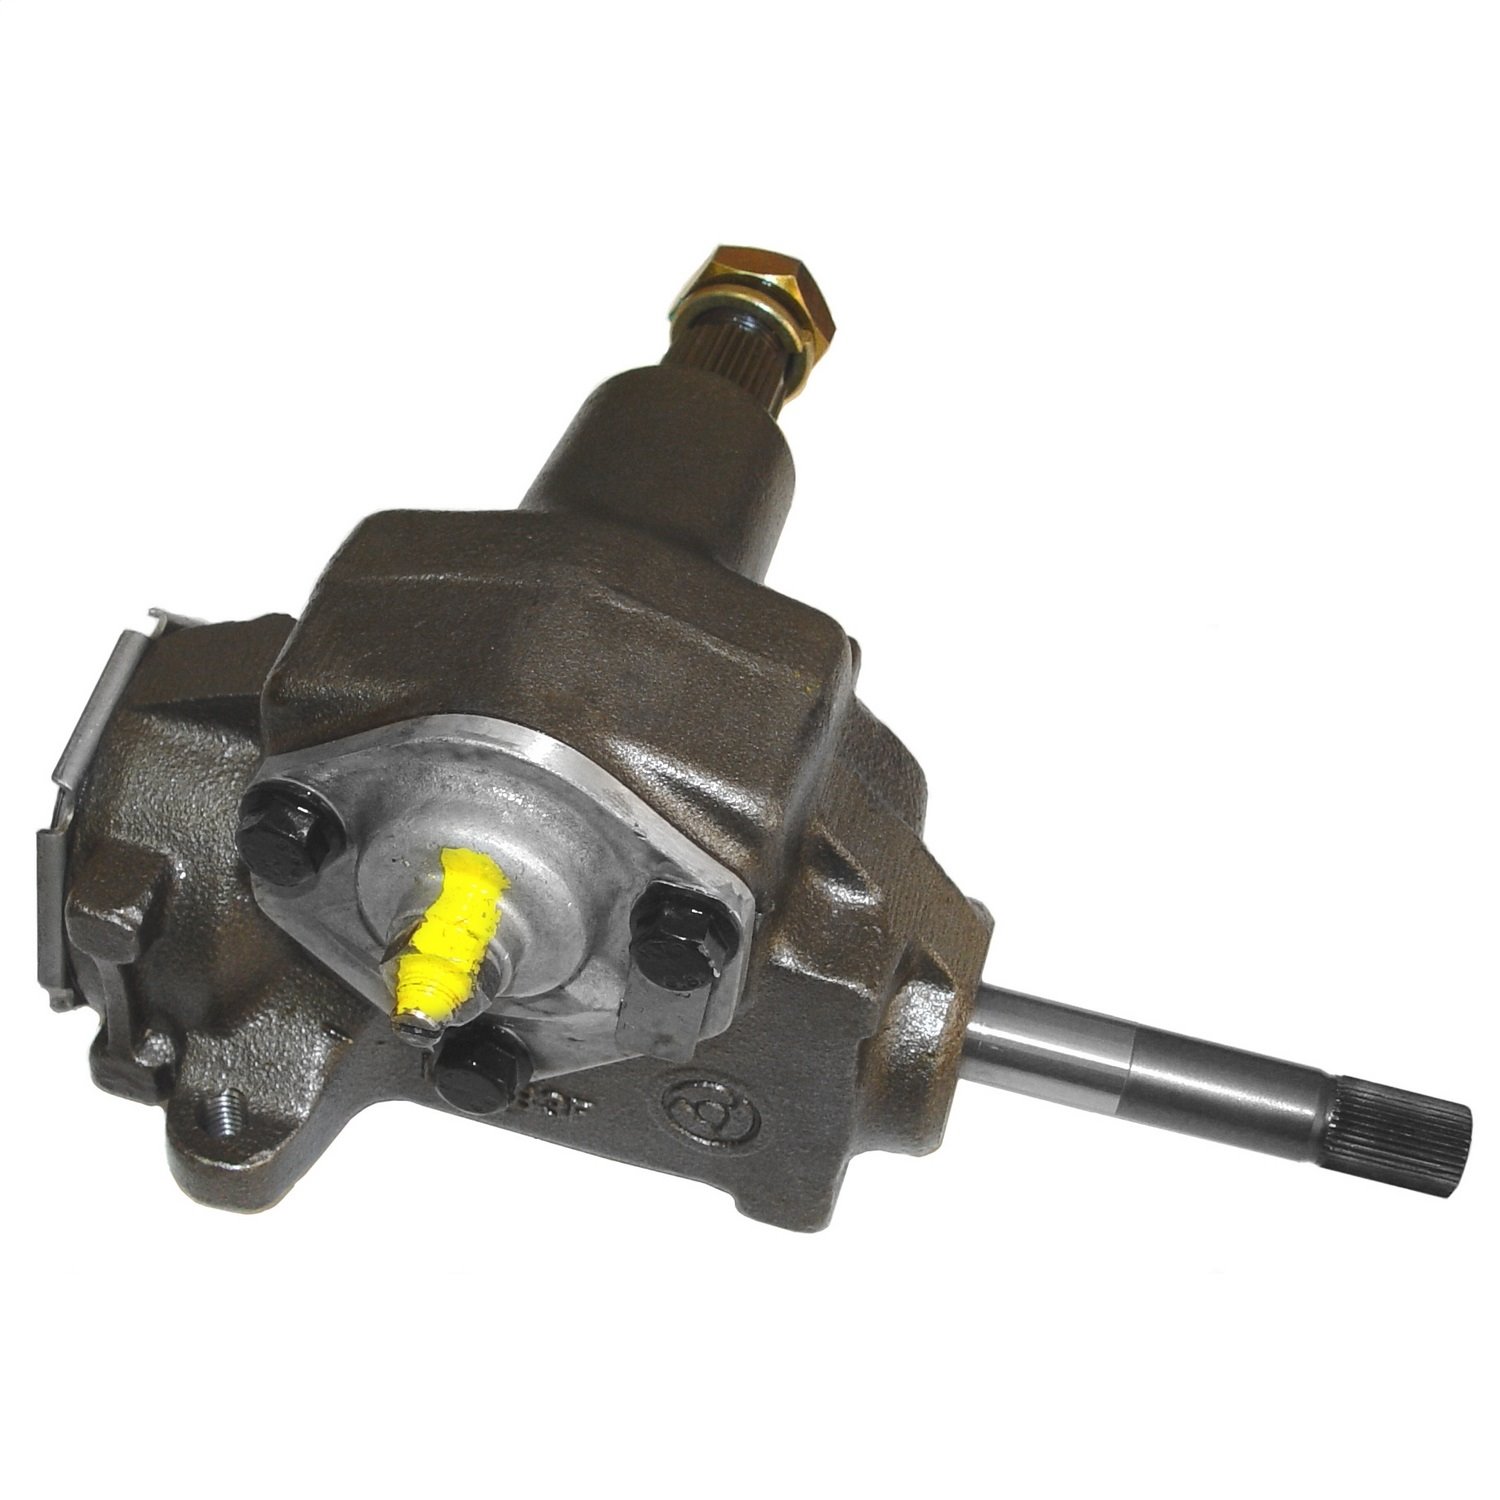 This manual steering gear box assembly from Omix-ADA fits 72-86 Jeep CJ models and 73-86 Jeep SJ trucks.